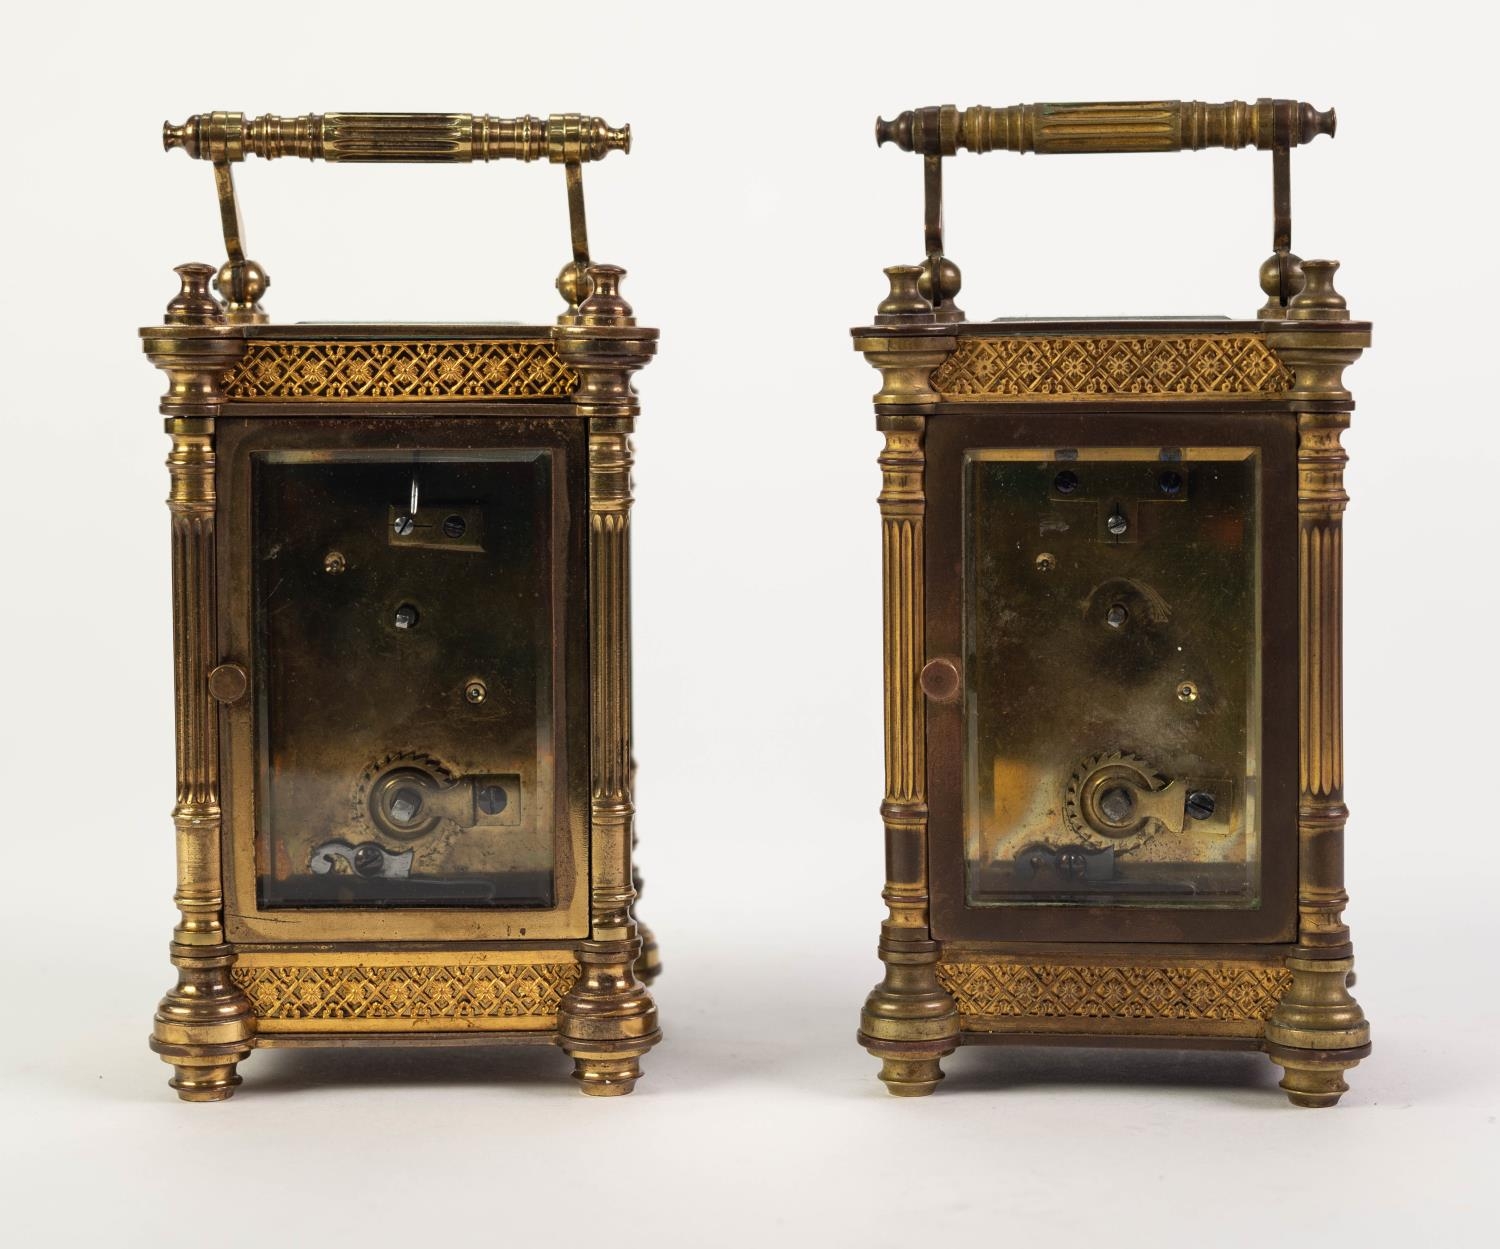 EARLY TWENTIETH CENTURY PAIR OF GILT BRASS CARRIAGE CLOCKS, each with white enamelled Roman dial, - Image 2 of 3